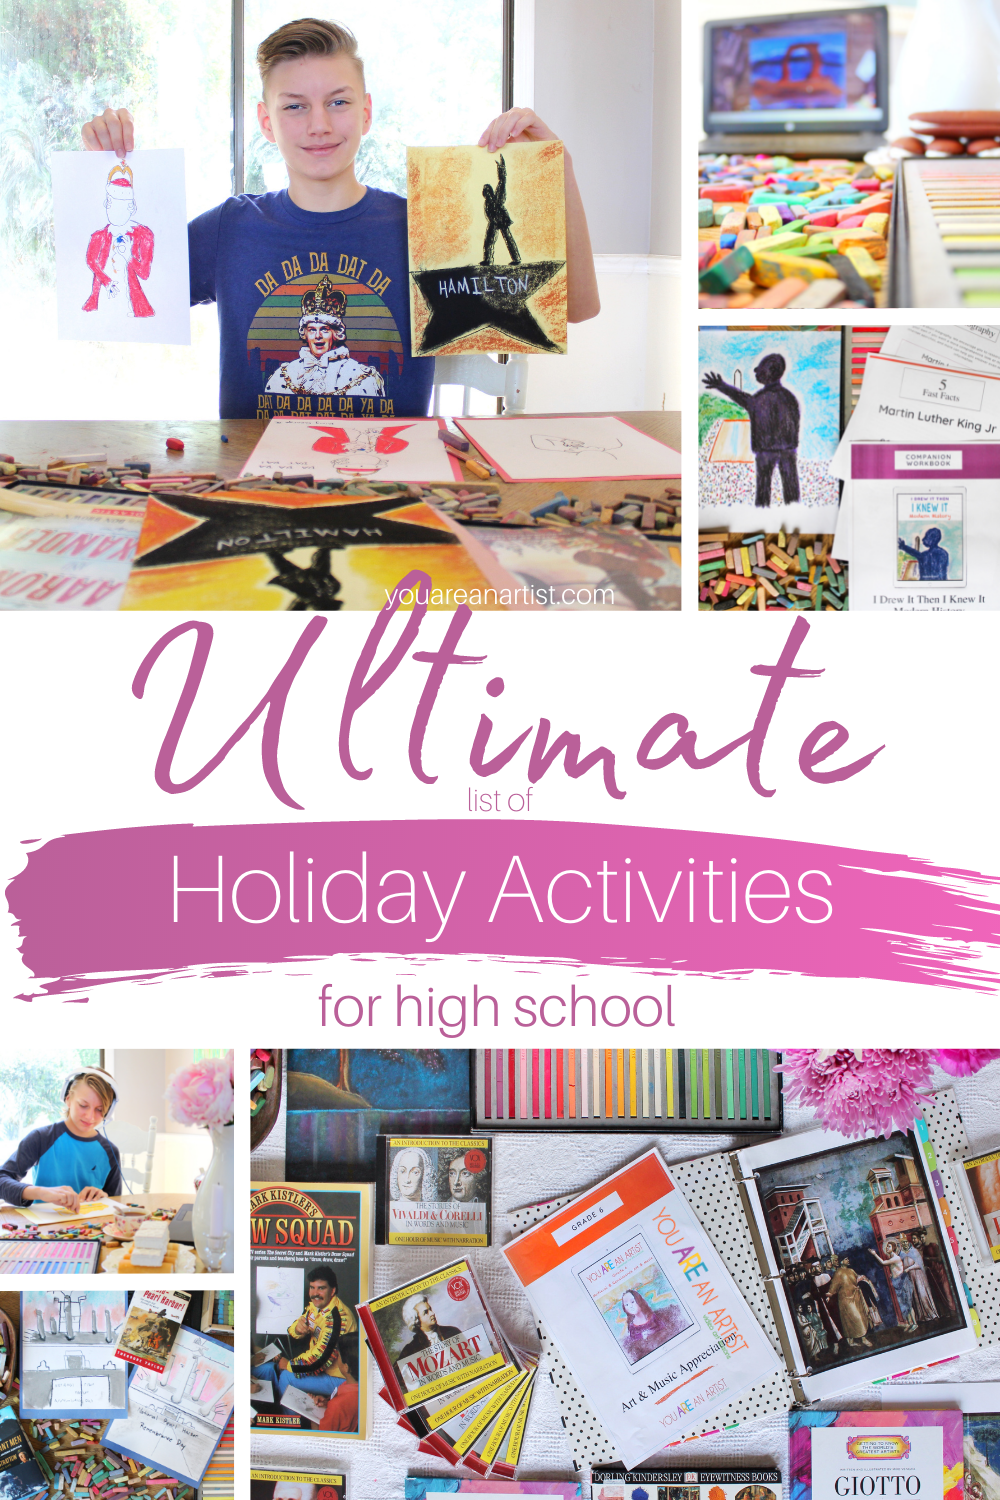 Ultimate List of Holiday Activities for High School:With all of these fantastic chalk pastel lessons available, we have created some memorable unit studies! All of these would be perfect for high school as well as for Holiday activities. So, enjoy this ultimate list of holiday activities for high school. #YouAREAnArtist #chalkpastels #chalkpastelartlessons #highschool #multisensory 